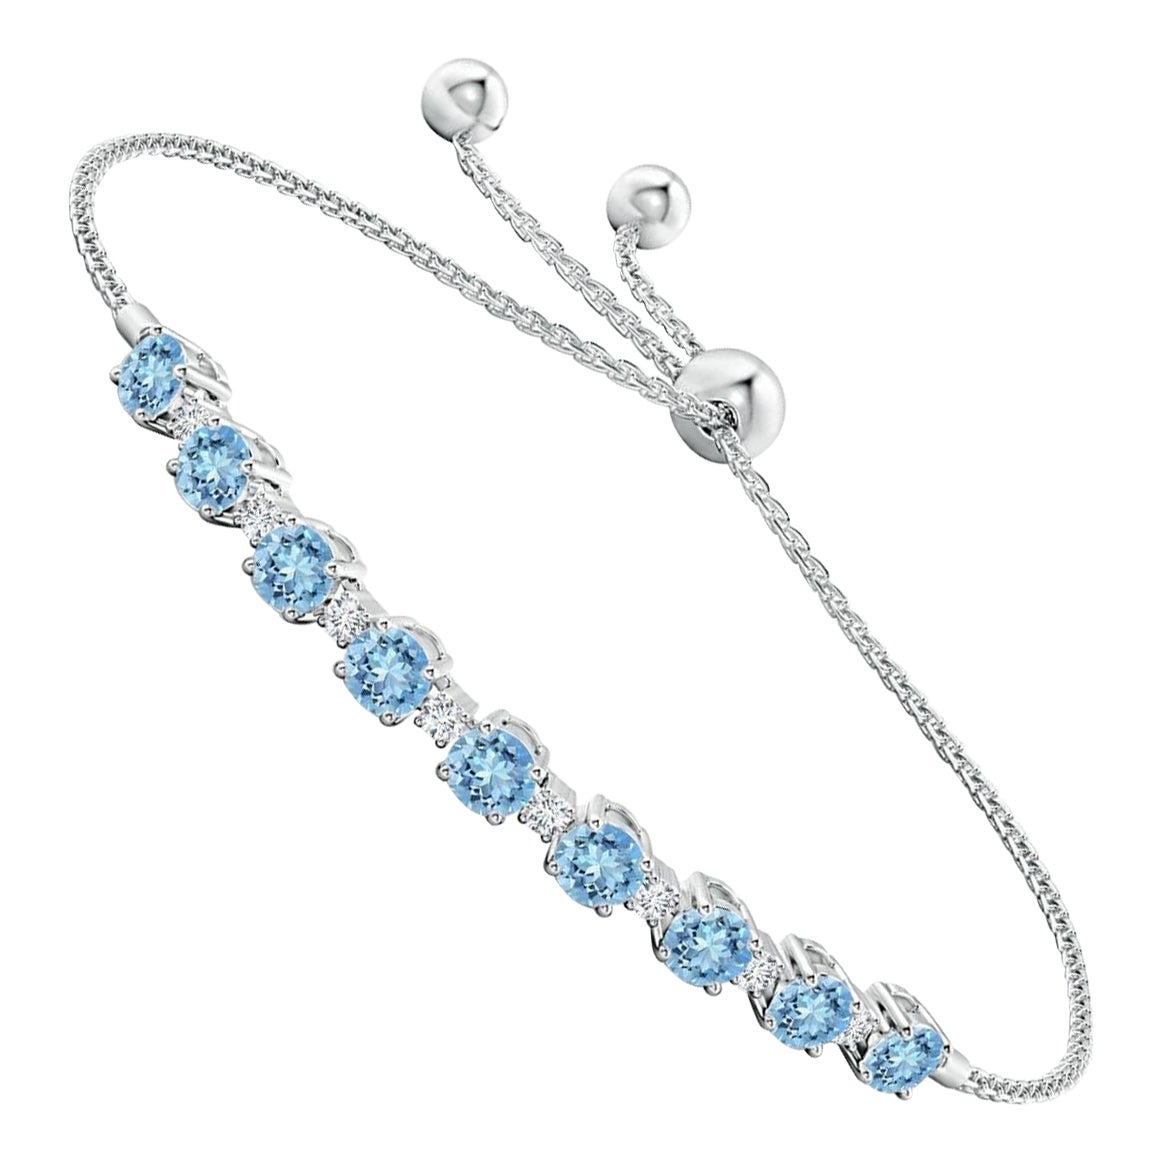 Natural 1.8ct Aquamarine and Diamond Tennis Bracelet in 14K White Gold For Sale